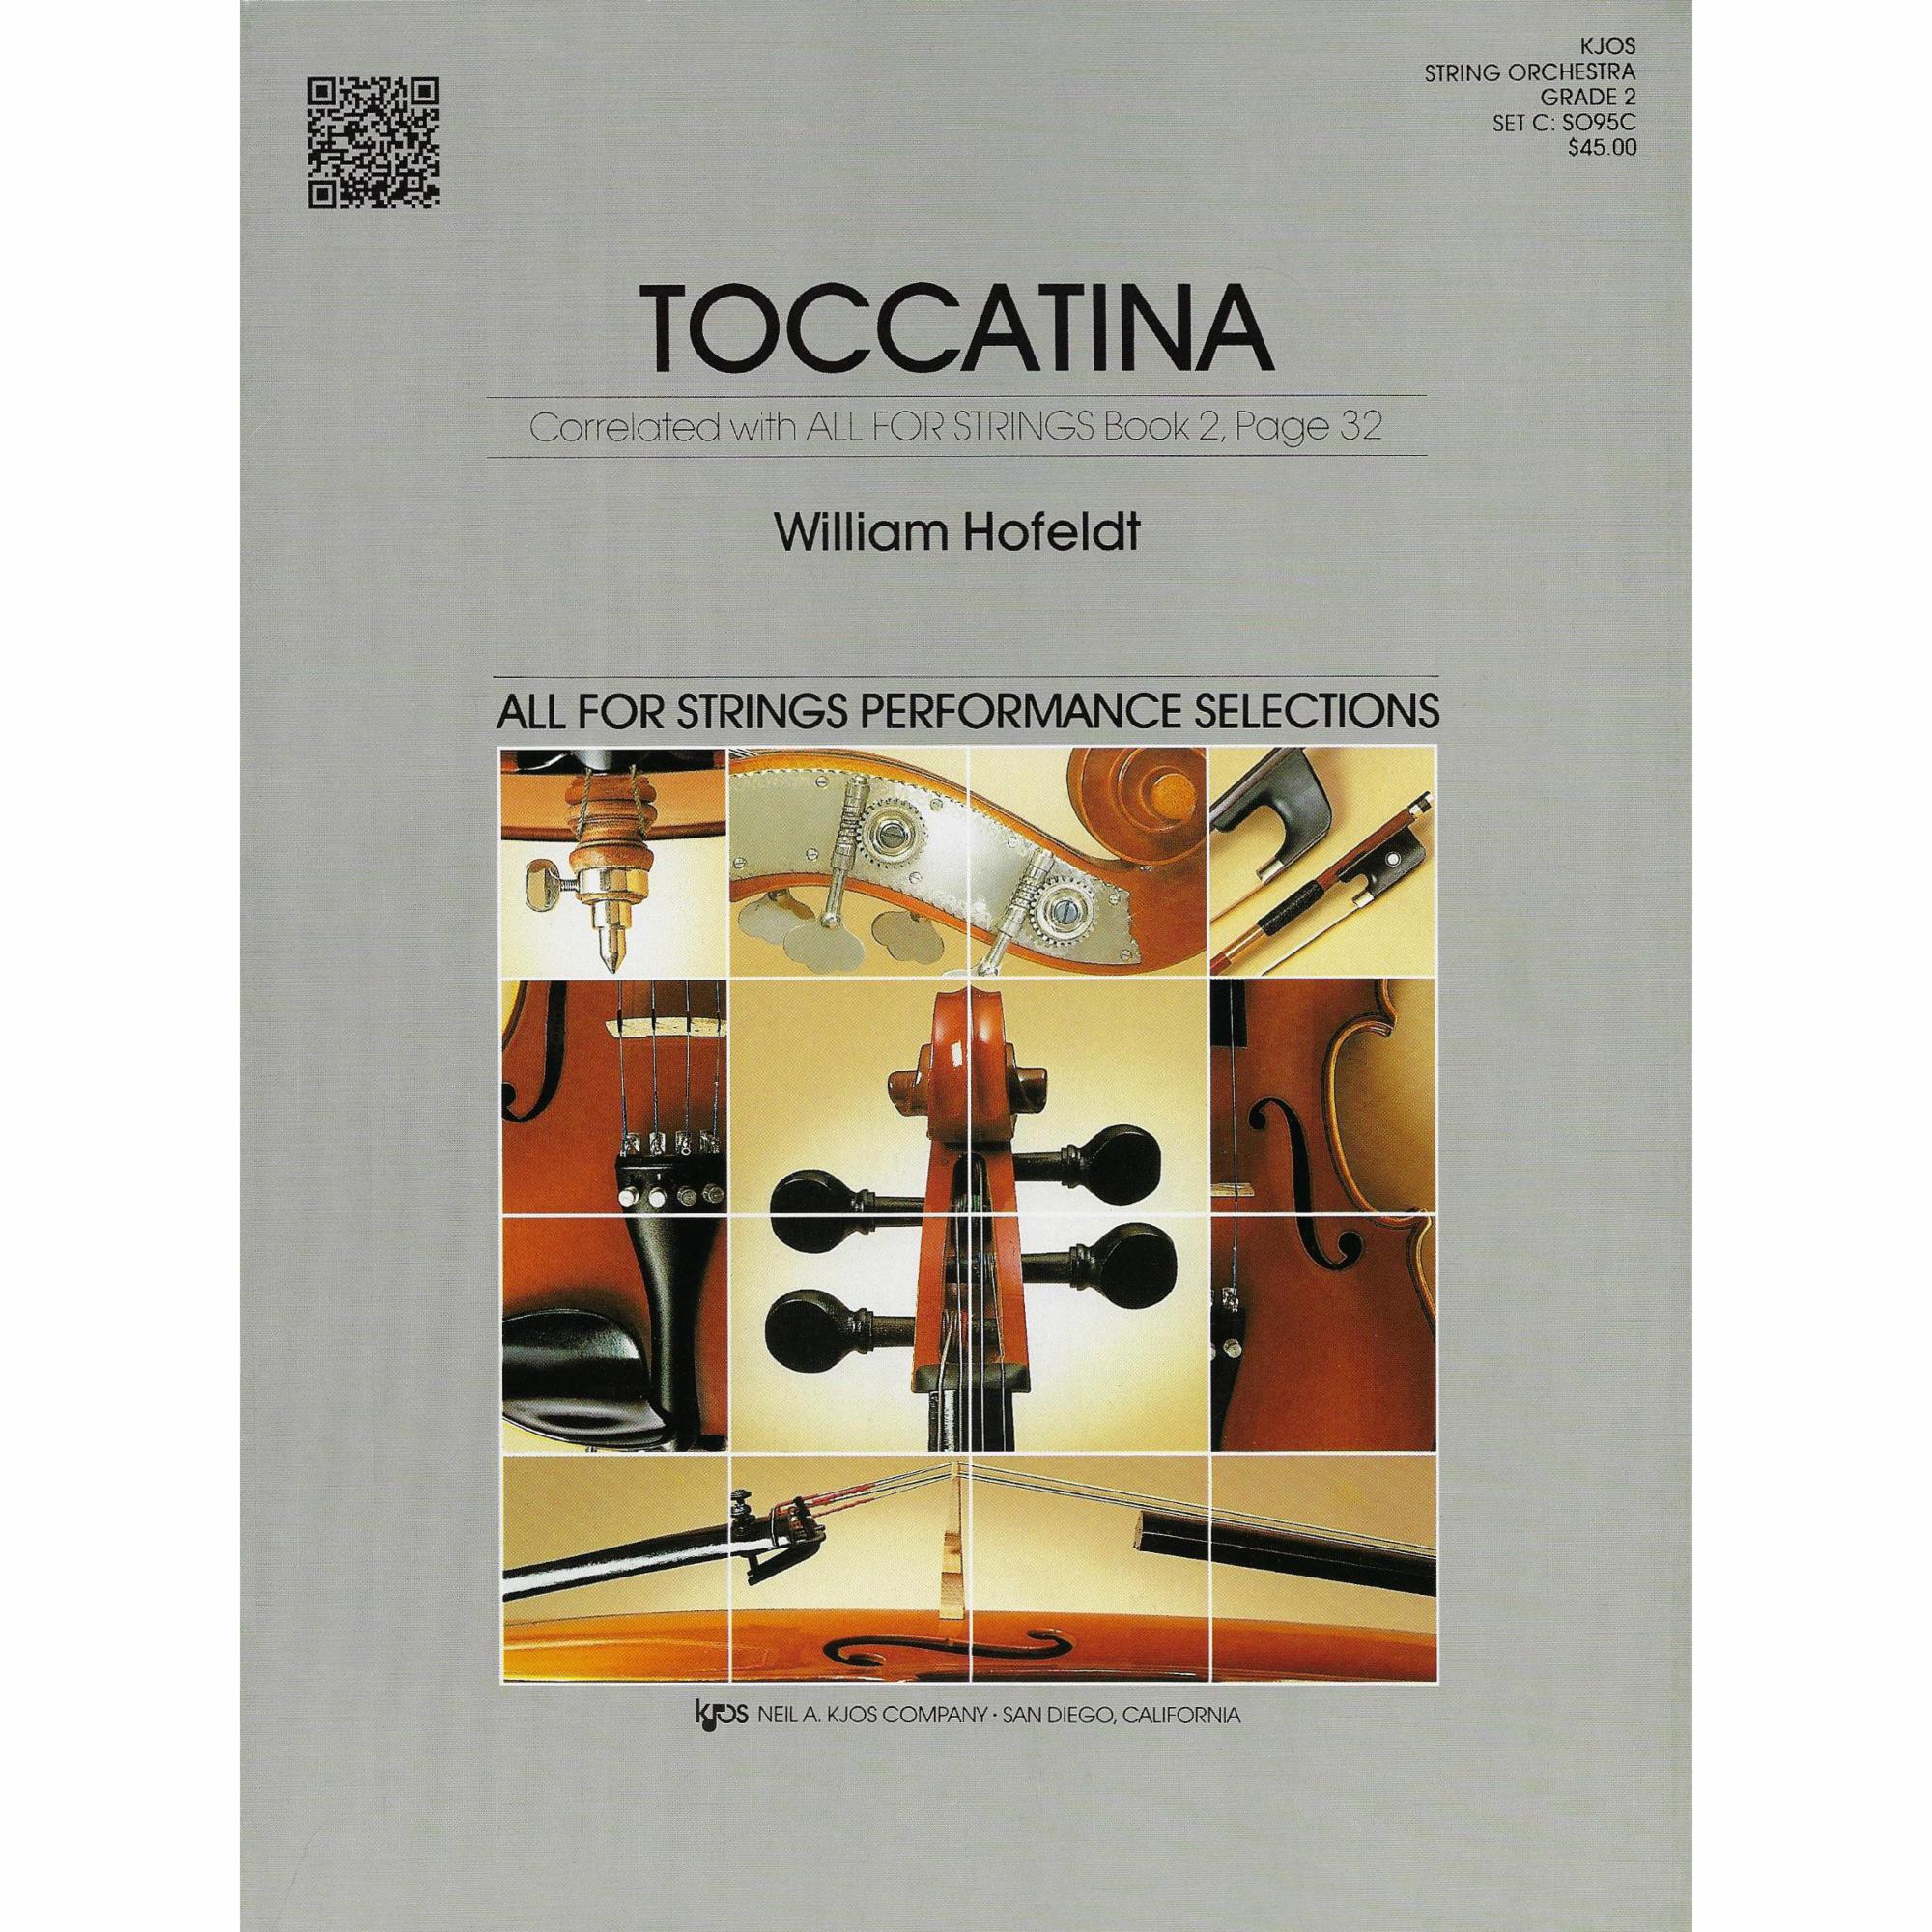 Toccatina for String Orchestra